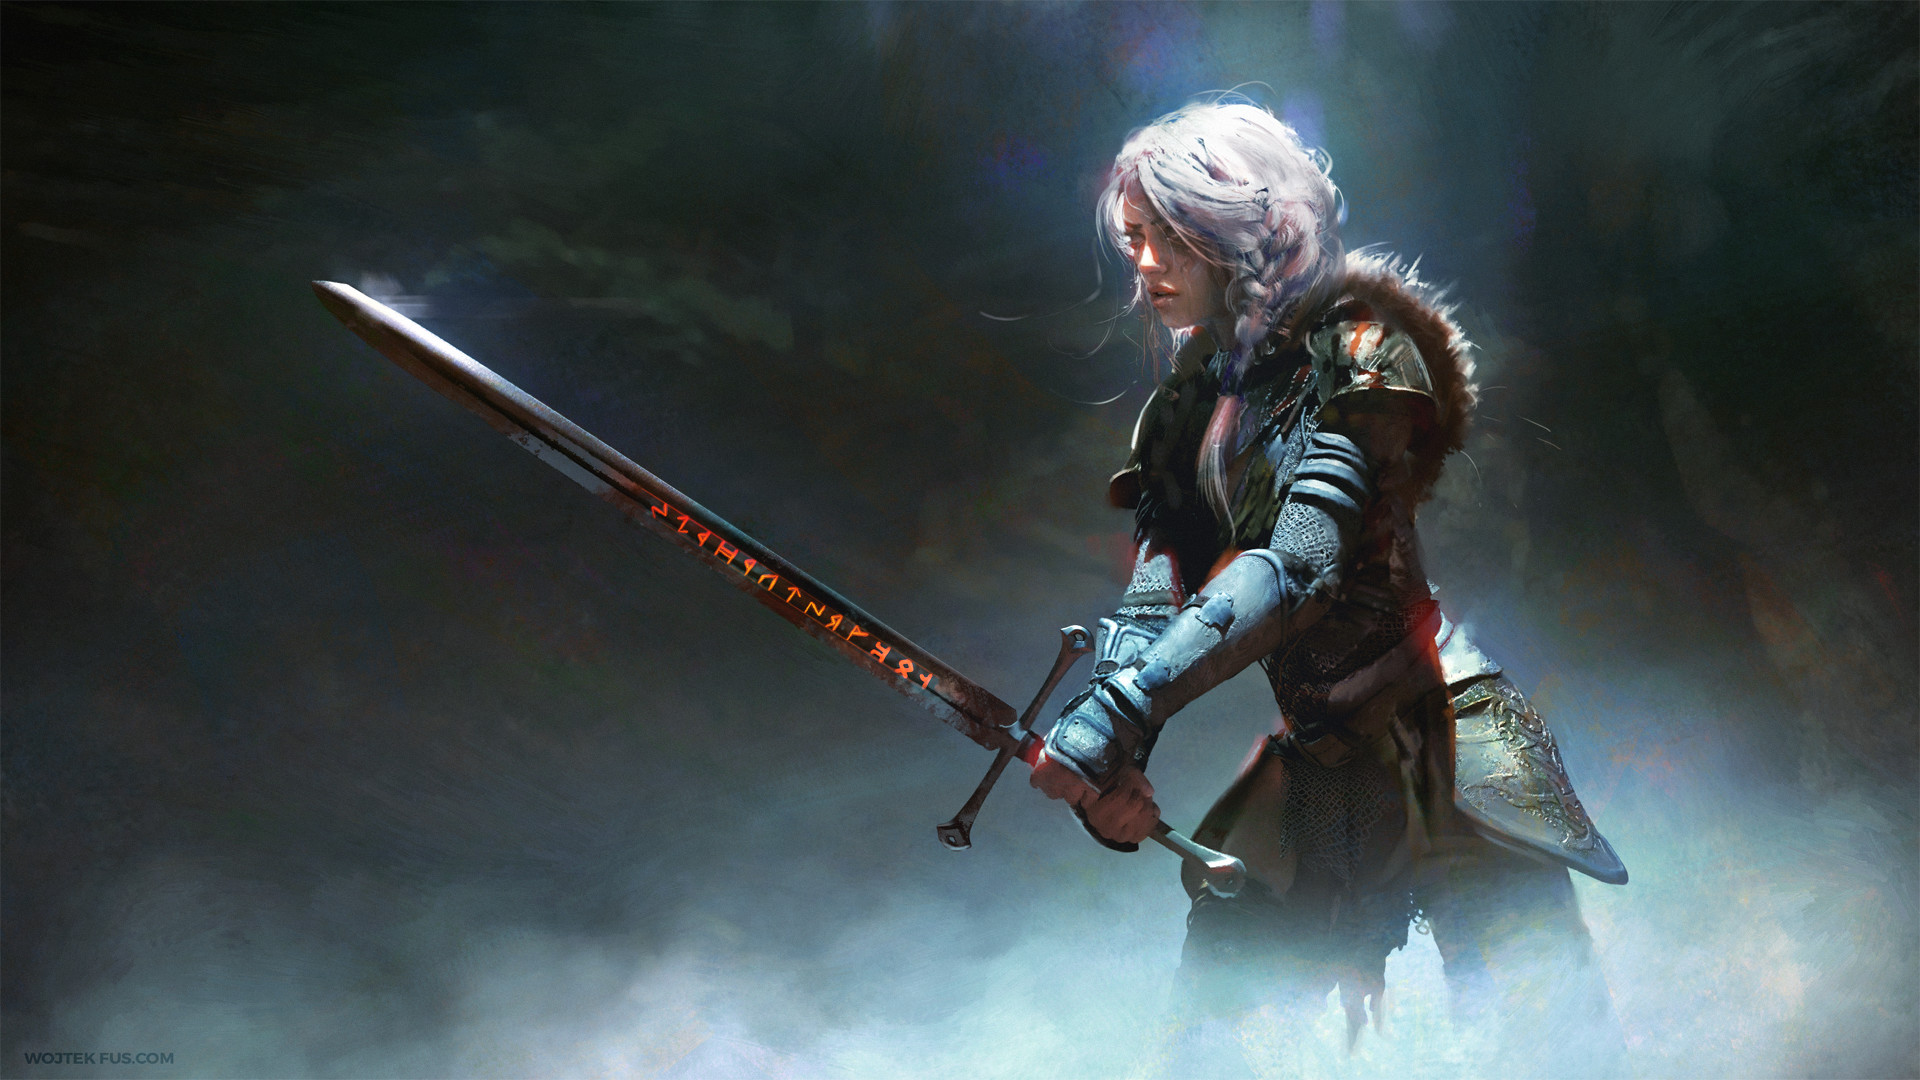 1920x1080 Video Game - The Witcher 3: Wild Hunt Ciri (The Witcher) Wallpaper